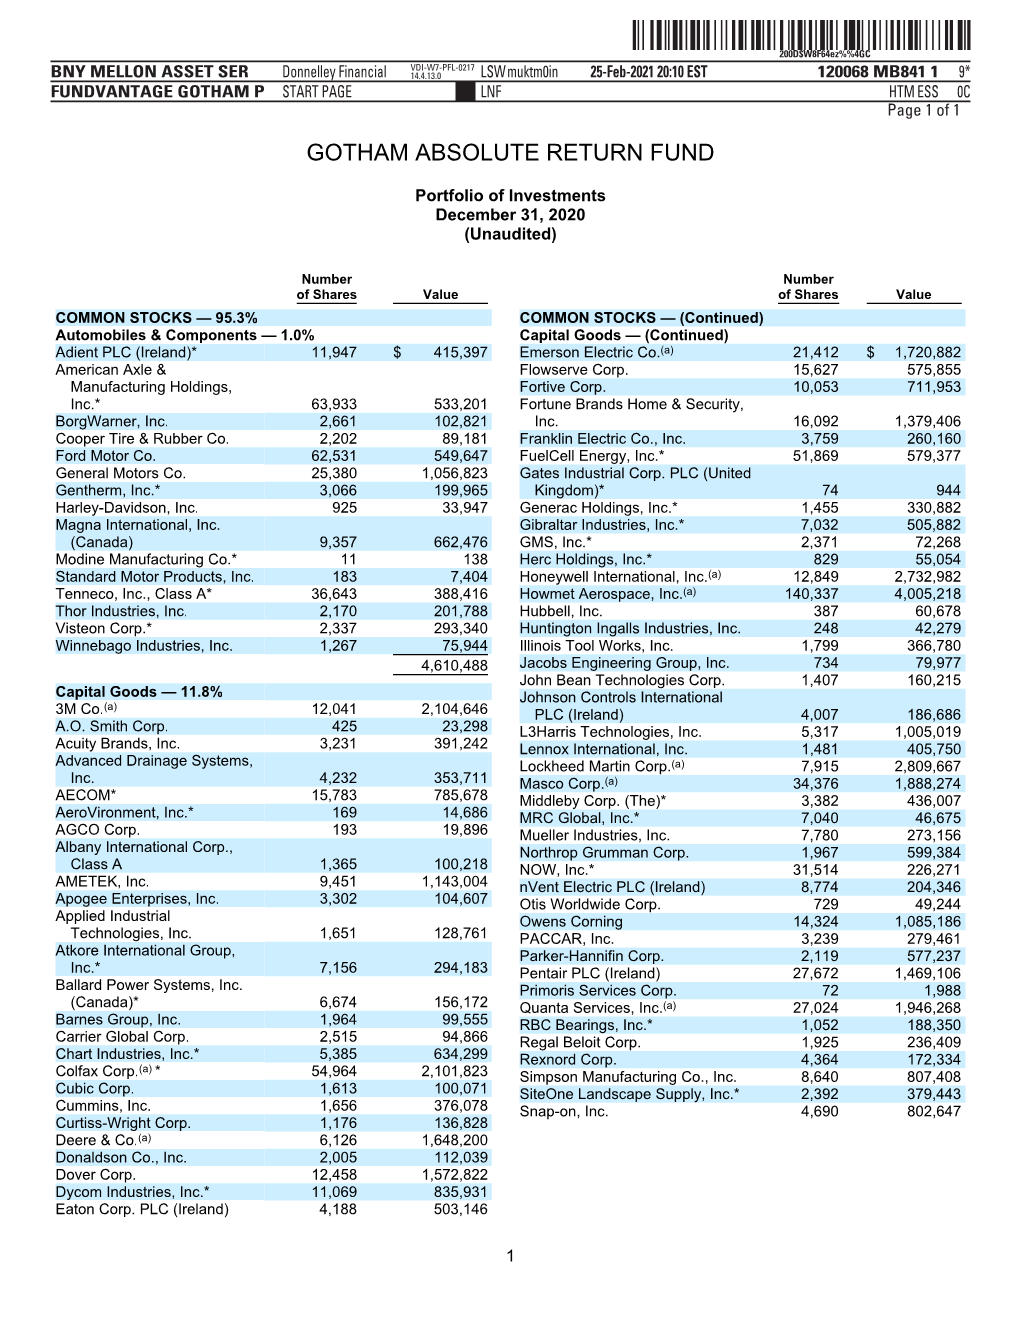 Fiscal Q1 Holdings